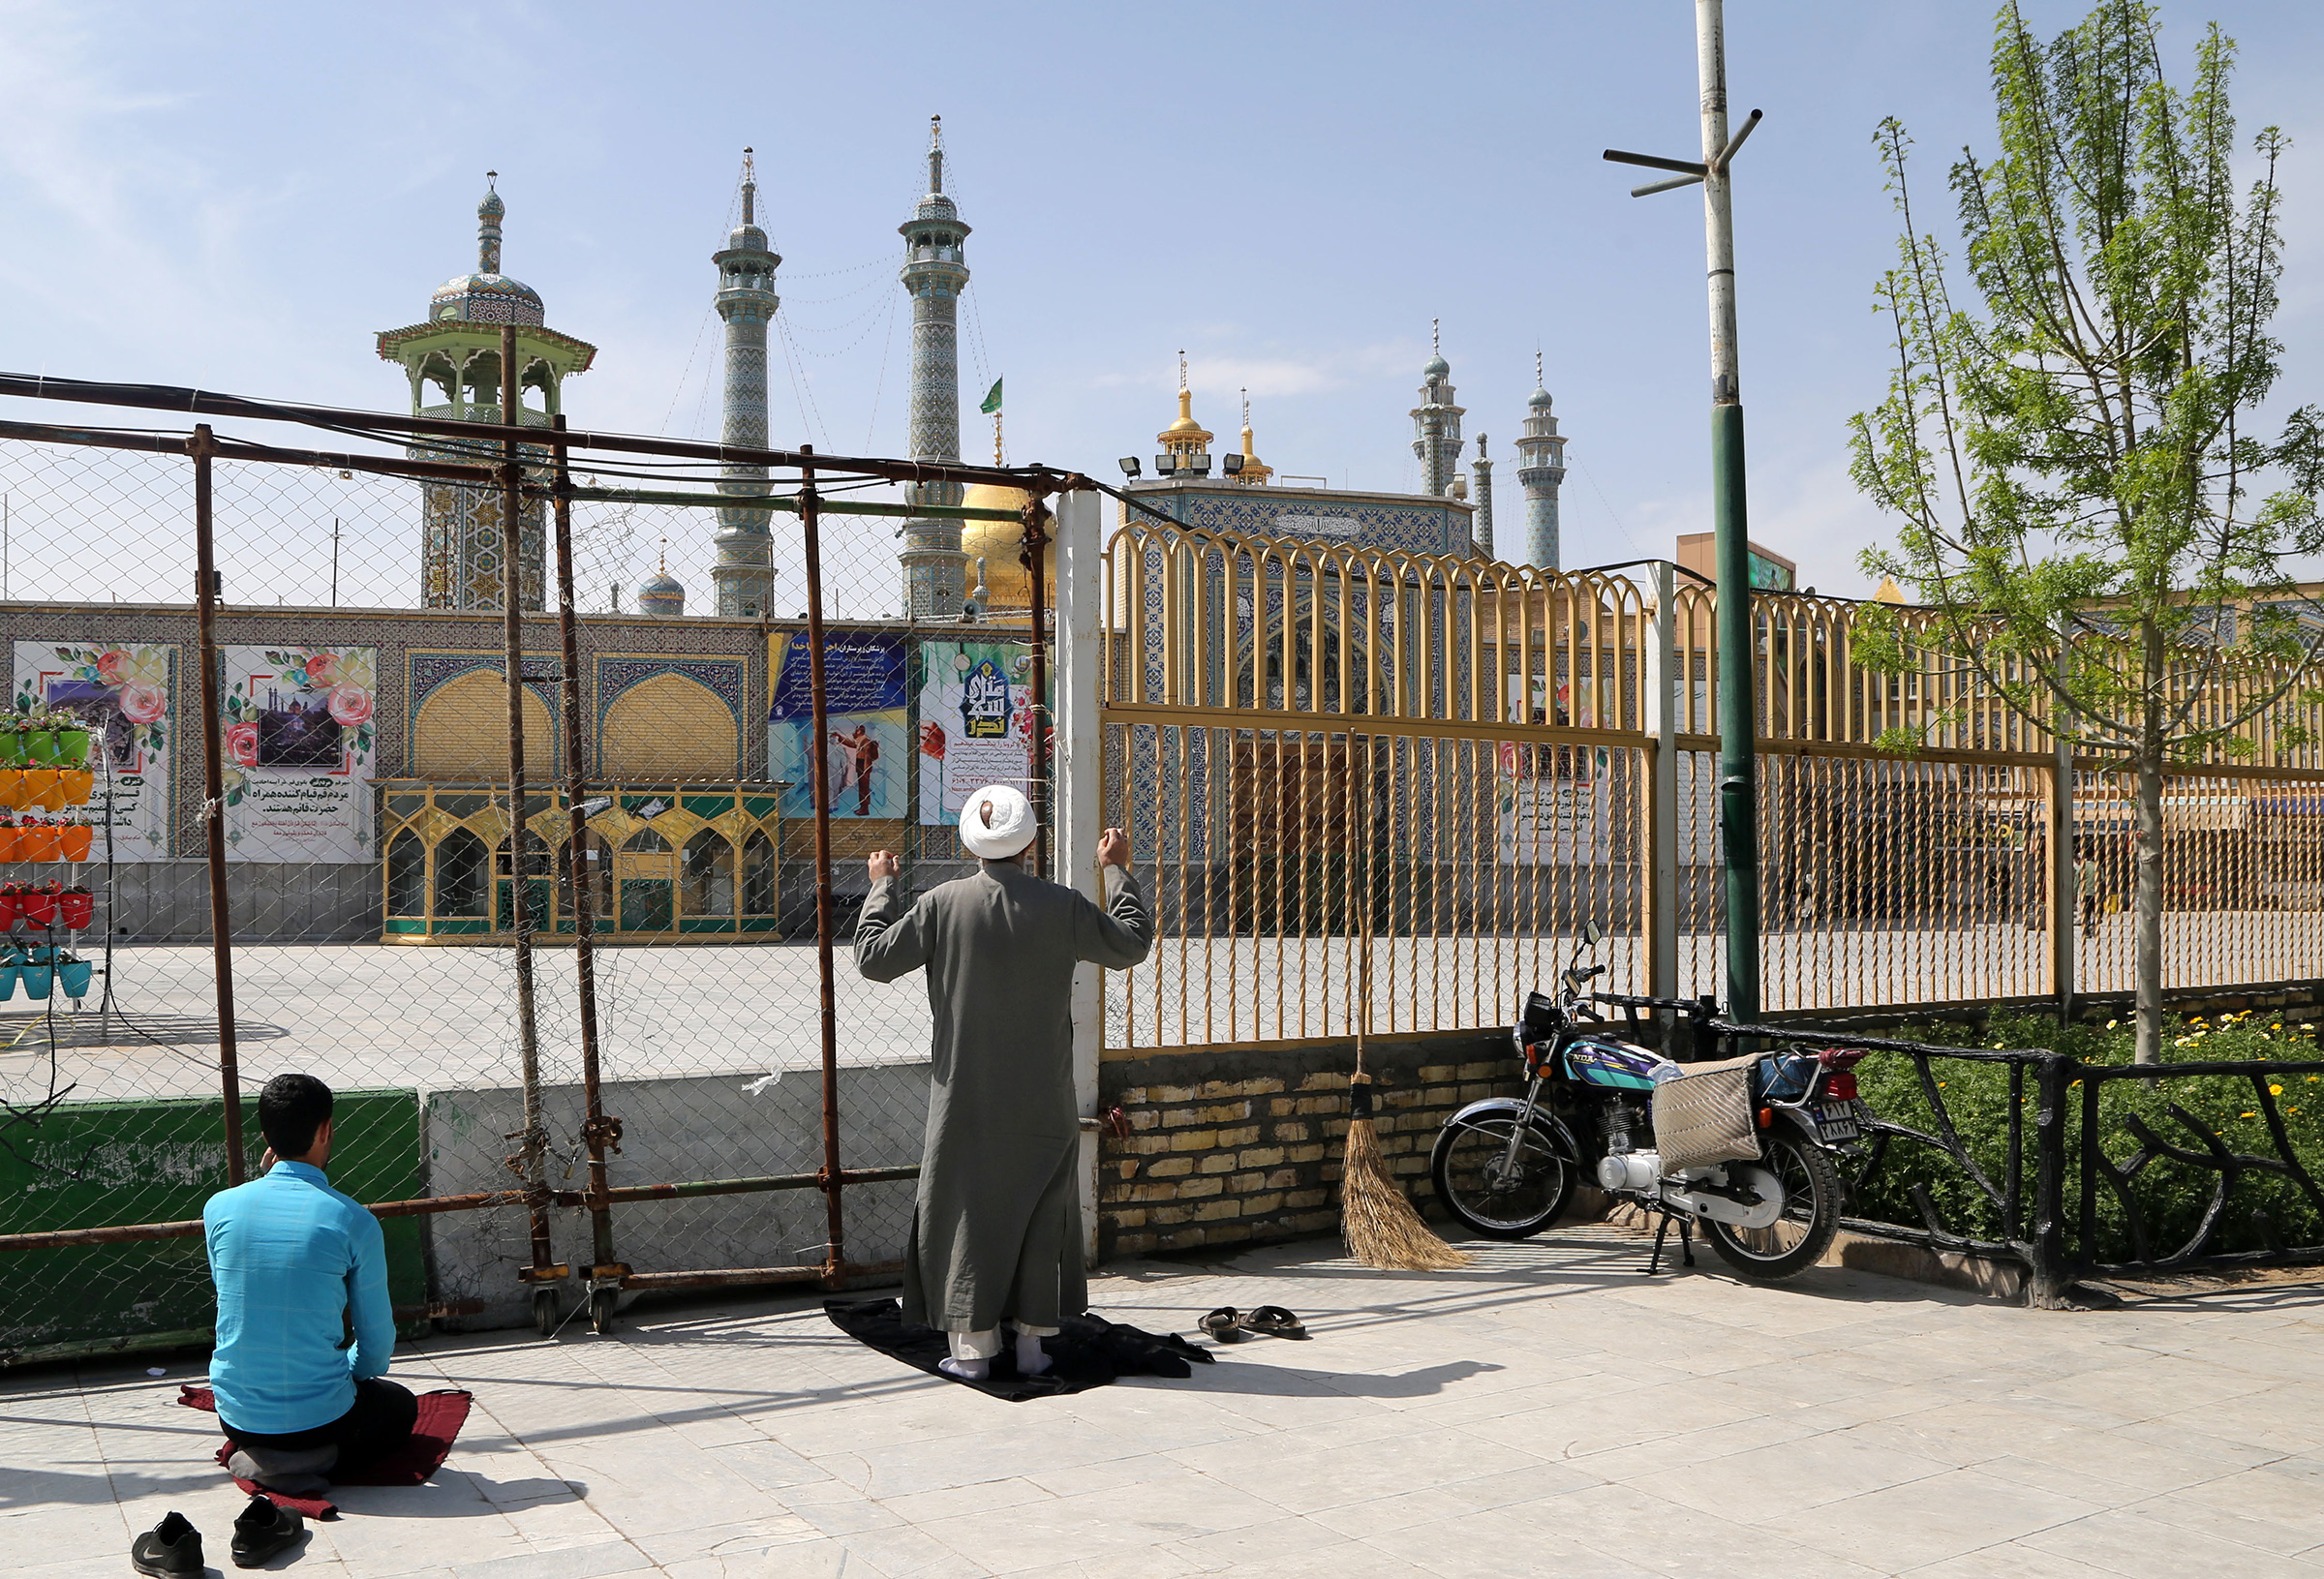 People continue to pray outside of Fatima Masumeh Shrine as it is closed for visitors due to the spread of COVID-19 in Qom, Iran on March 17.